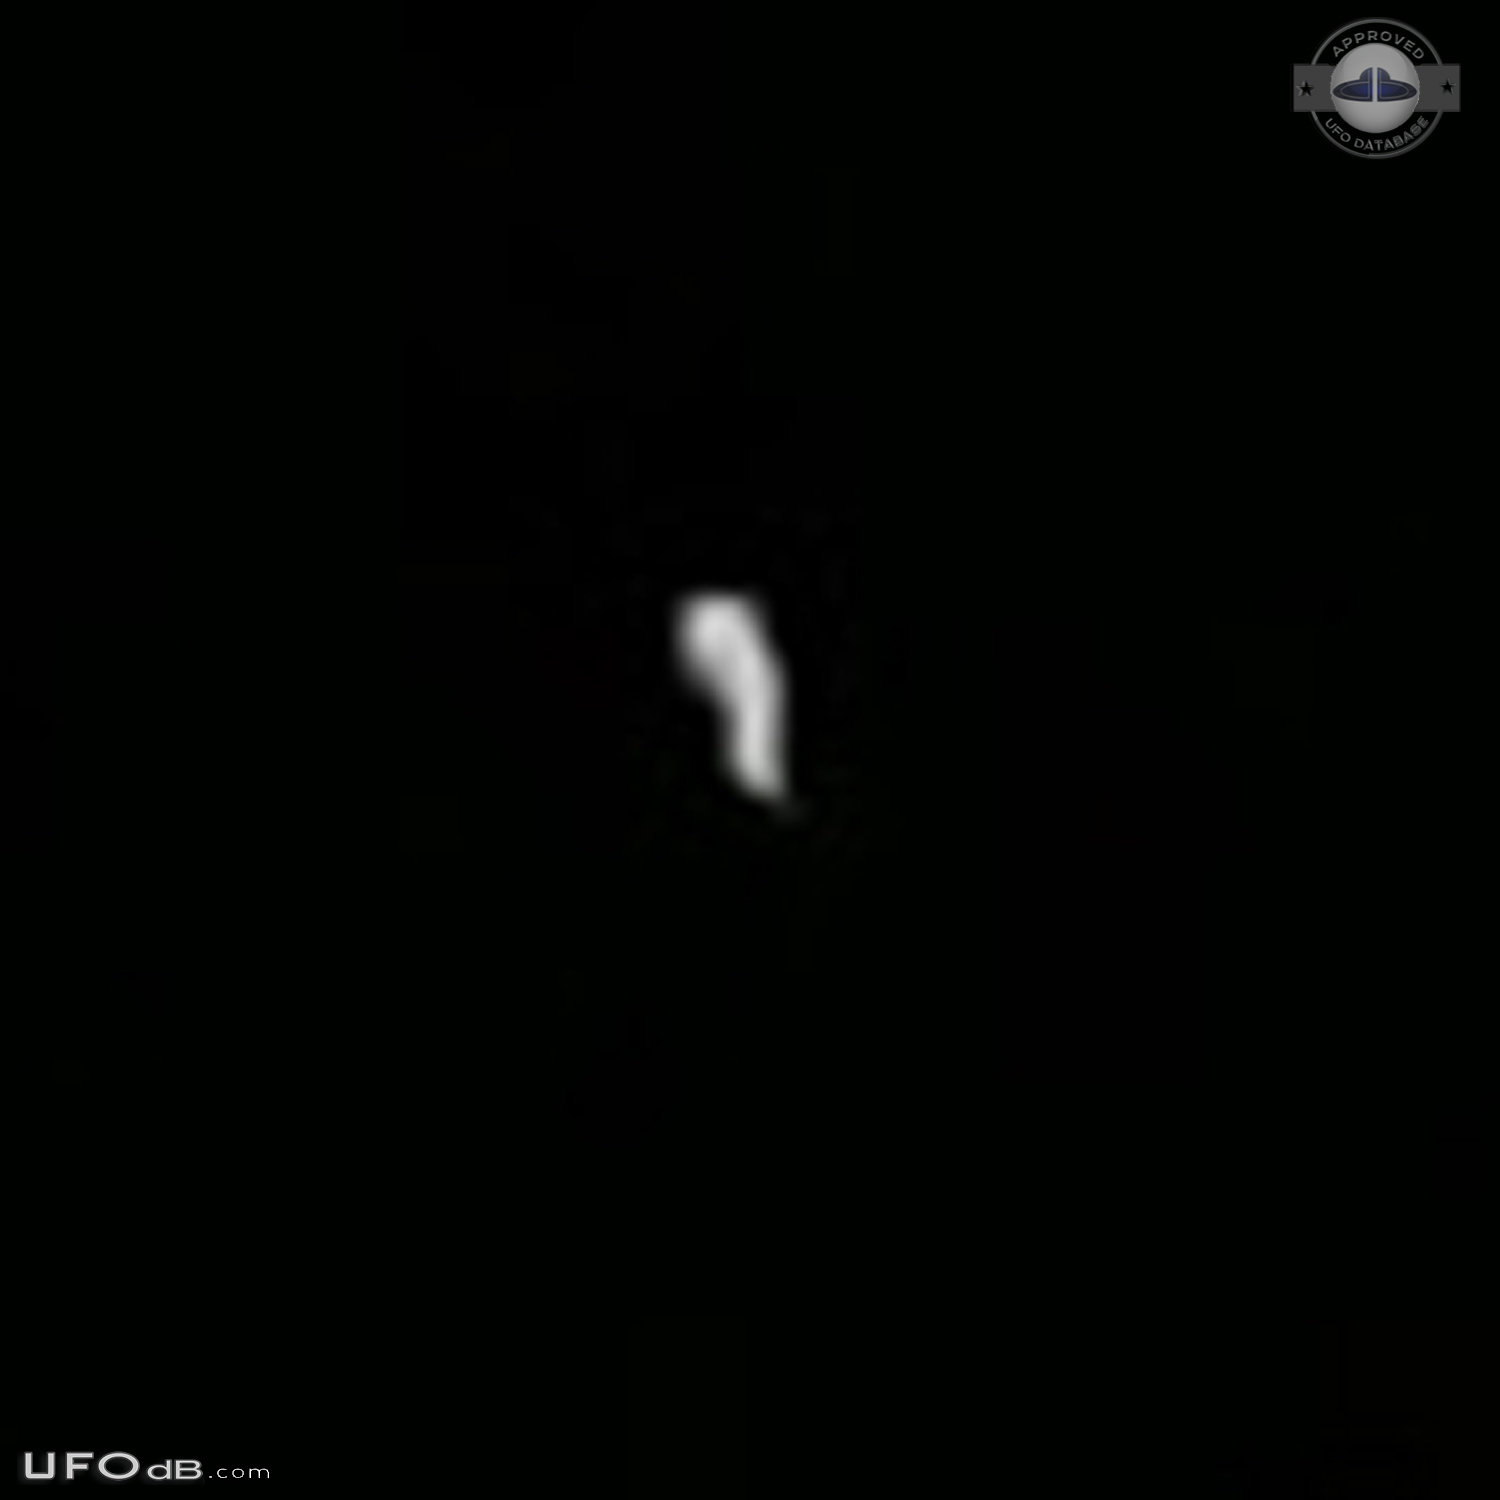 2 different UFOs - black and silhouette triangle and many orbs 2015 UFO Picture #682-4